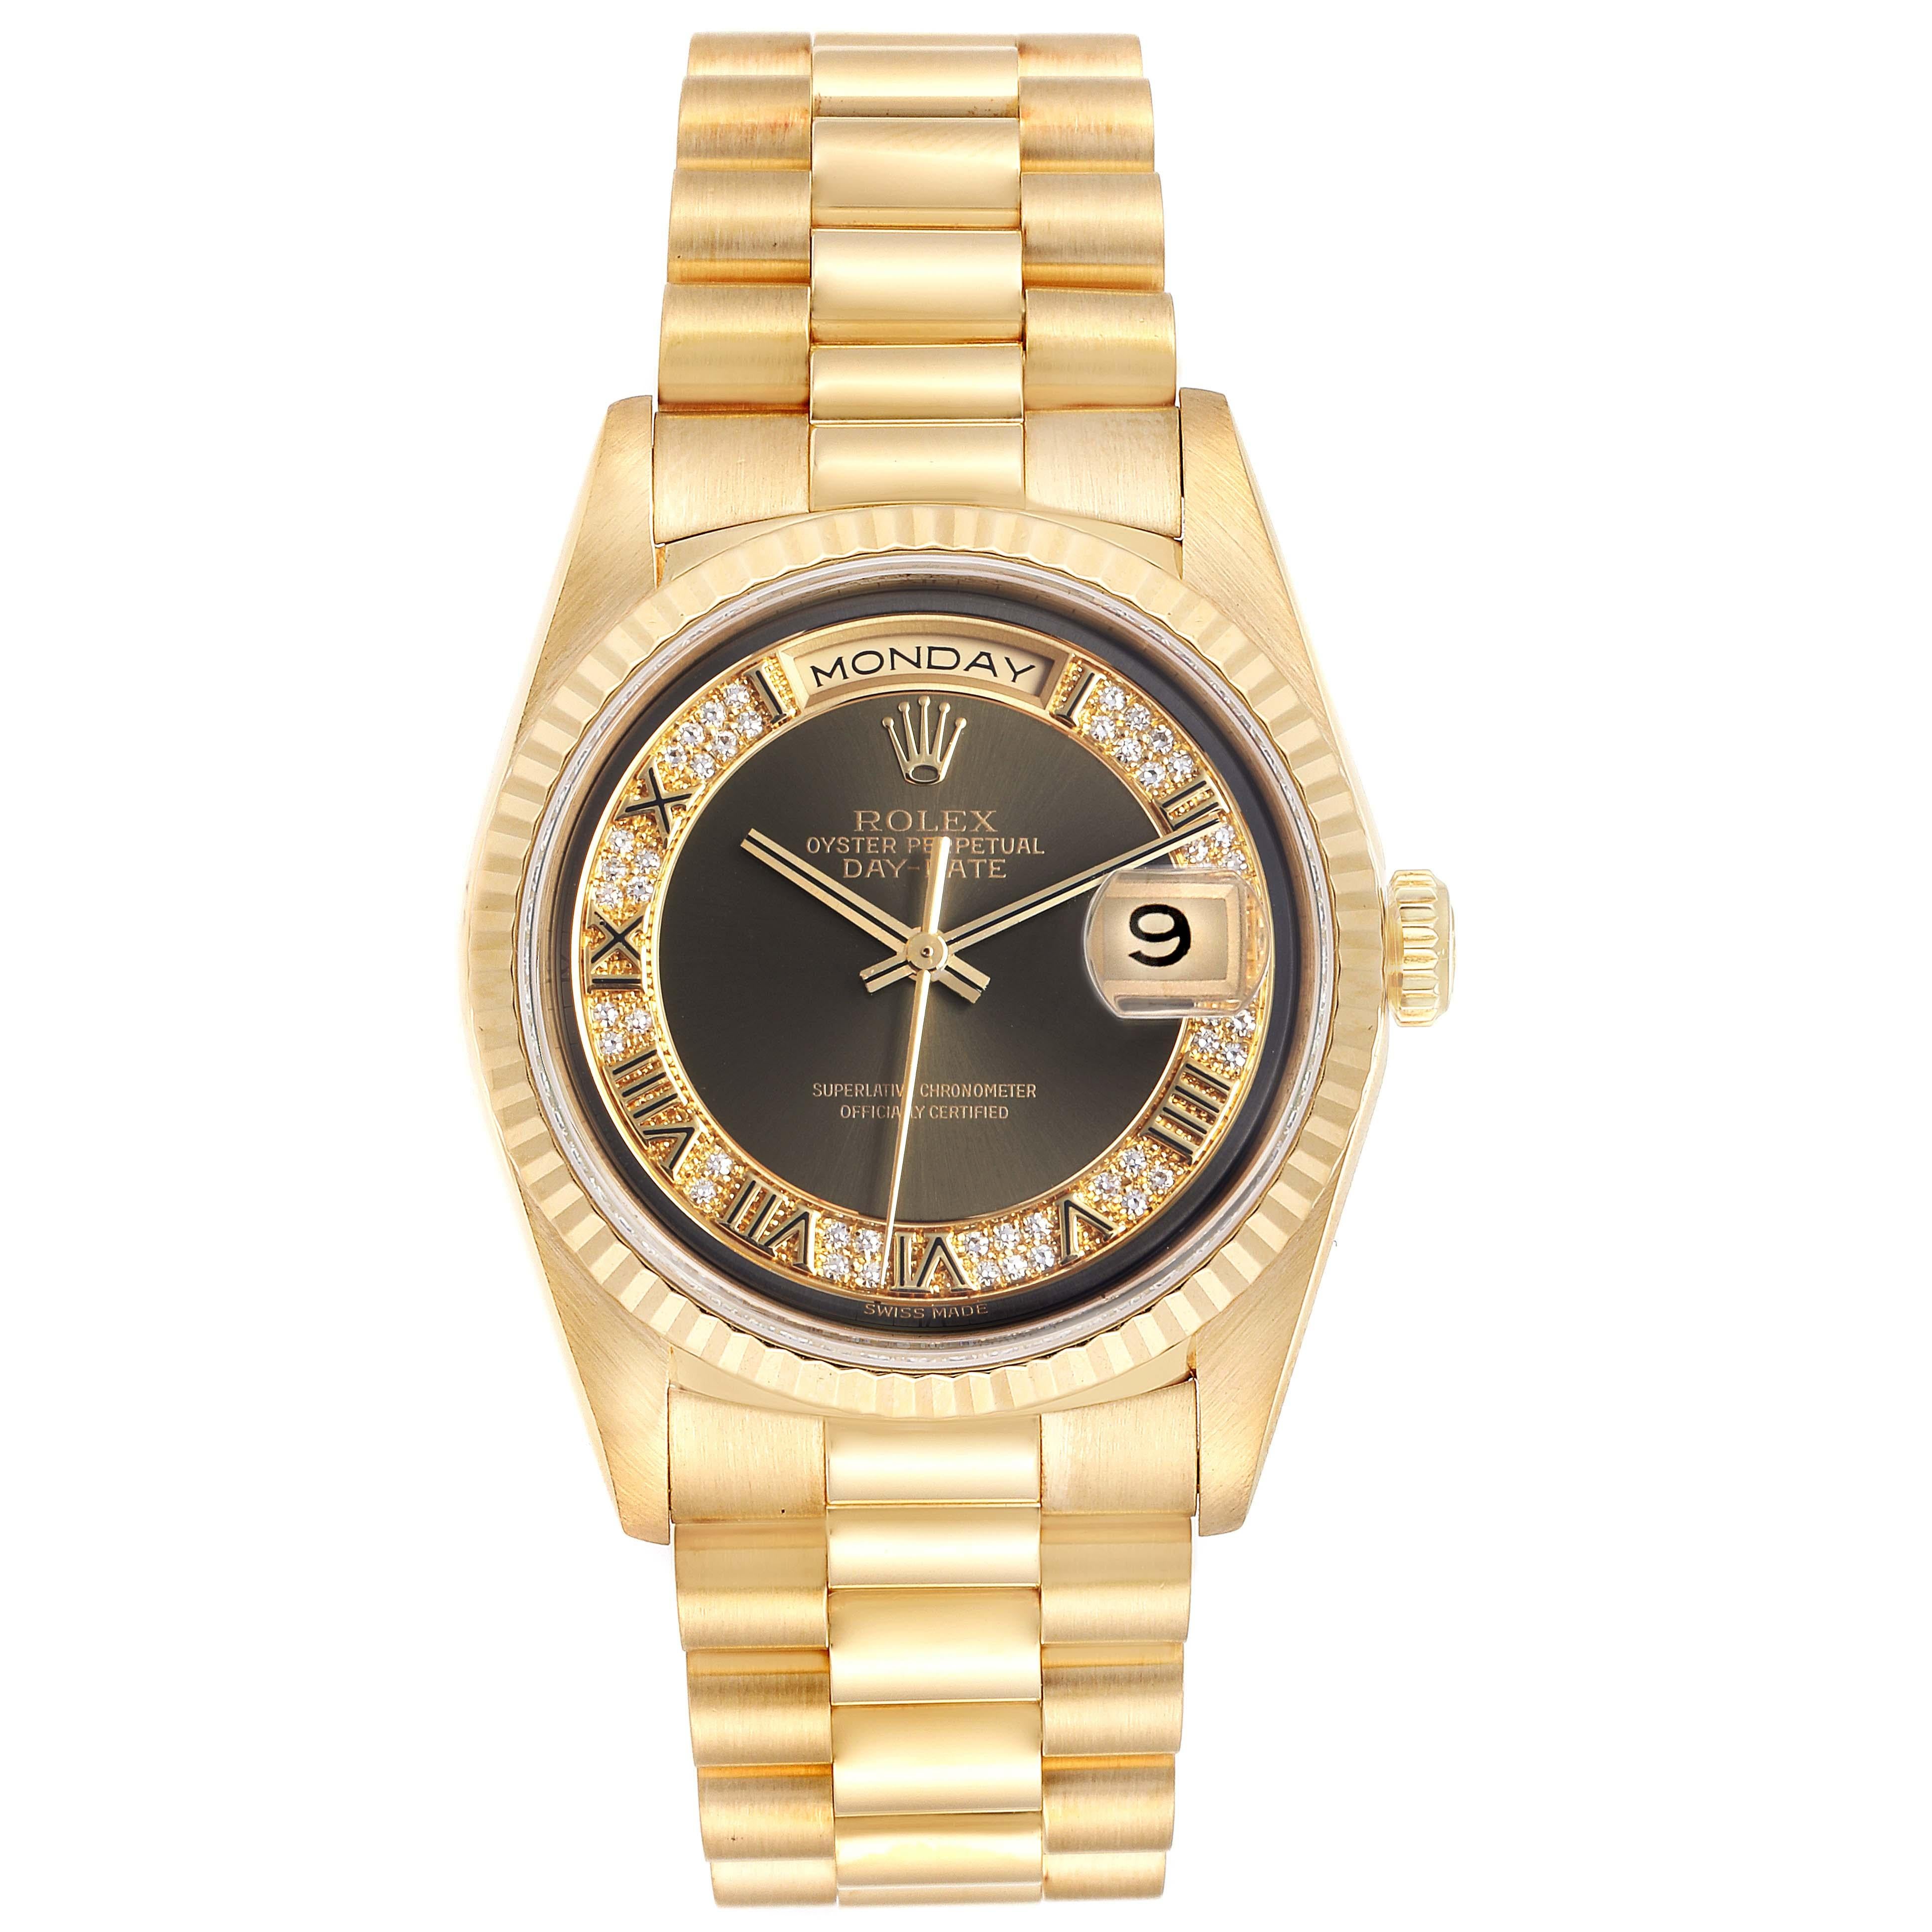 Rolex President Day-Date Yellow Gold Myriad Diamonds Mens Watch 18238. Officially certified chronometer self-winding movement. double quick set function. 18k yellow gold oyster case 36.0 mm in diameter. Rolex logo on a crown. 18K yellow gold fluted